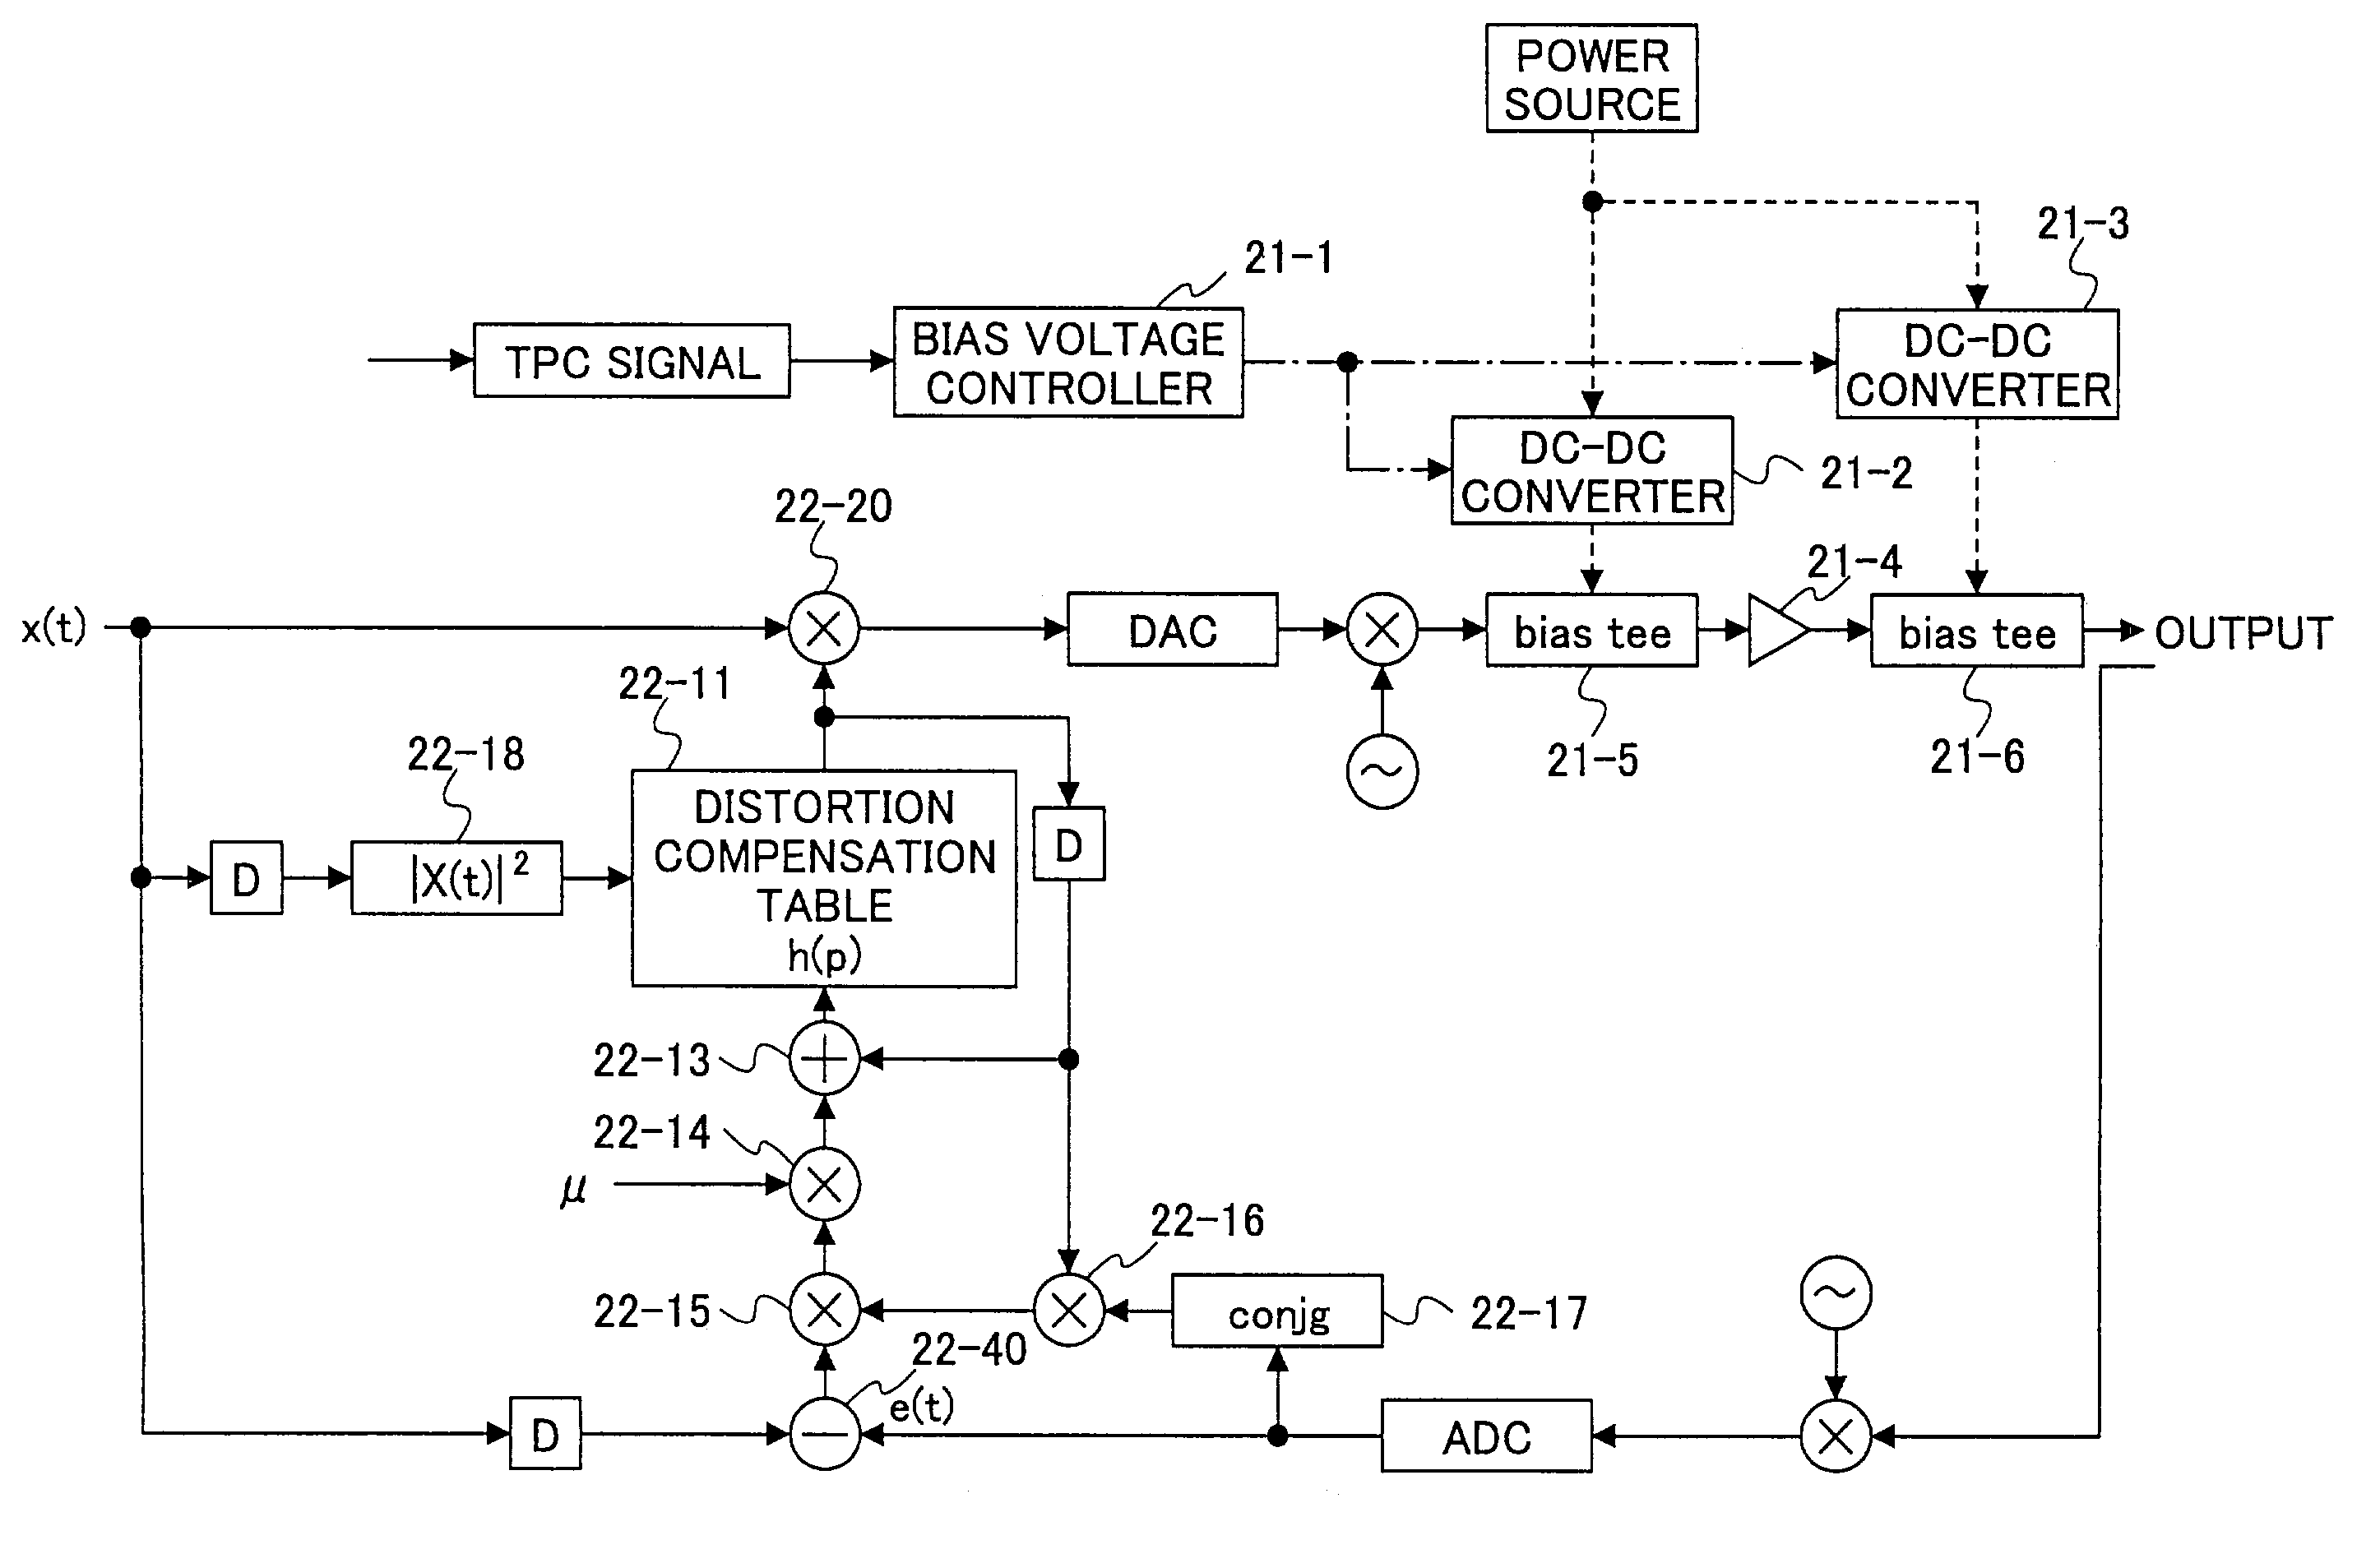 Radio with a distortion compensation capability